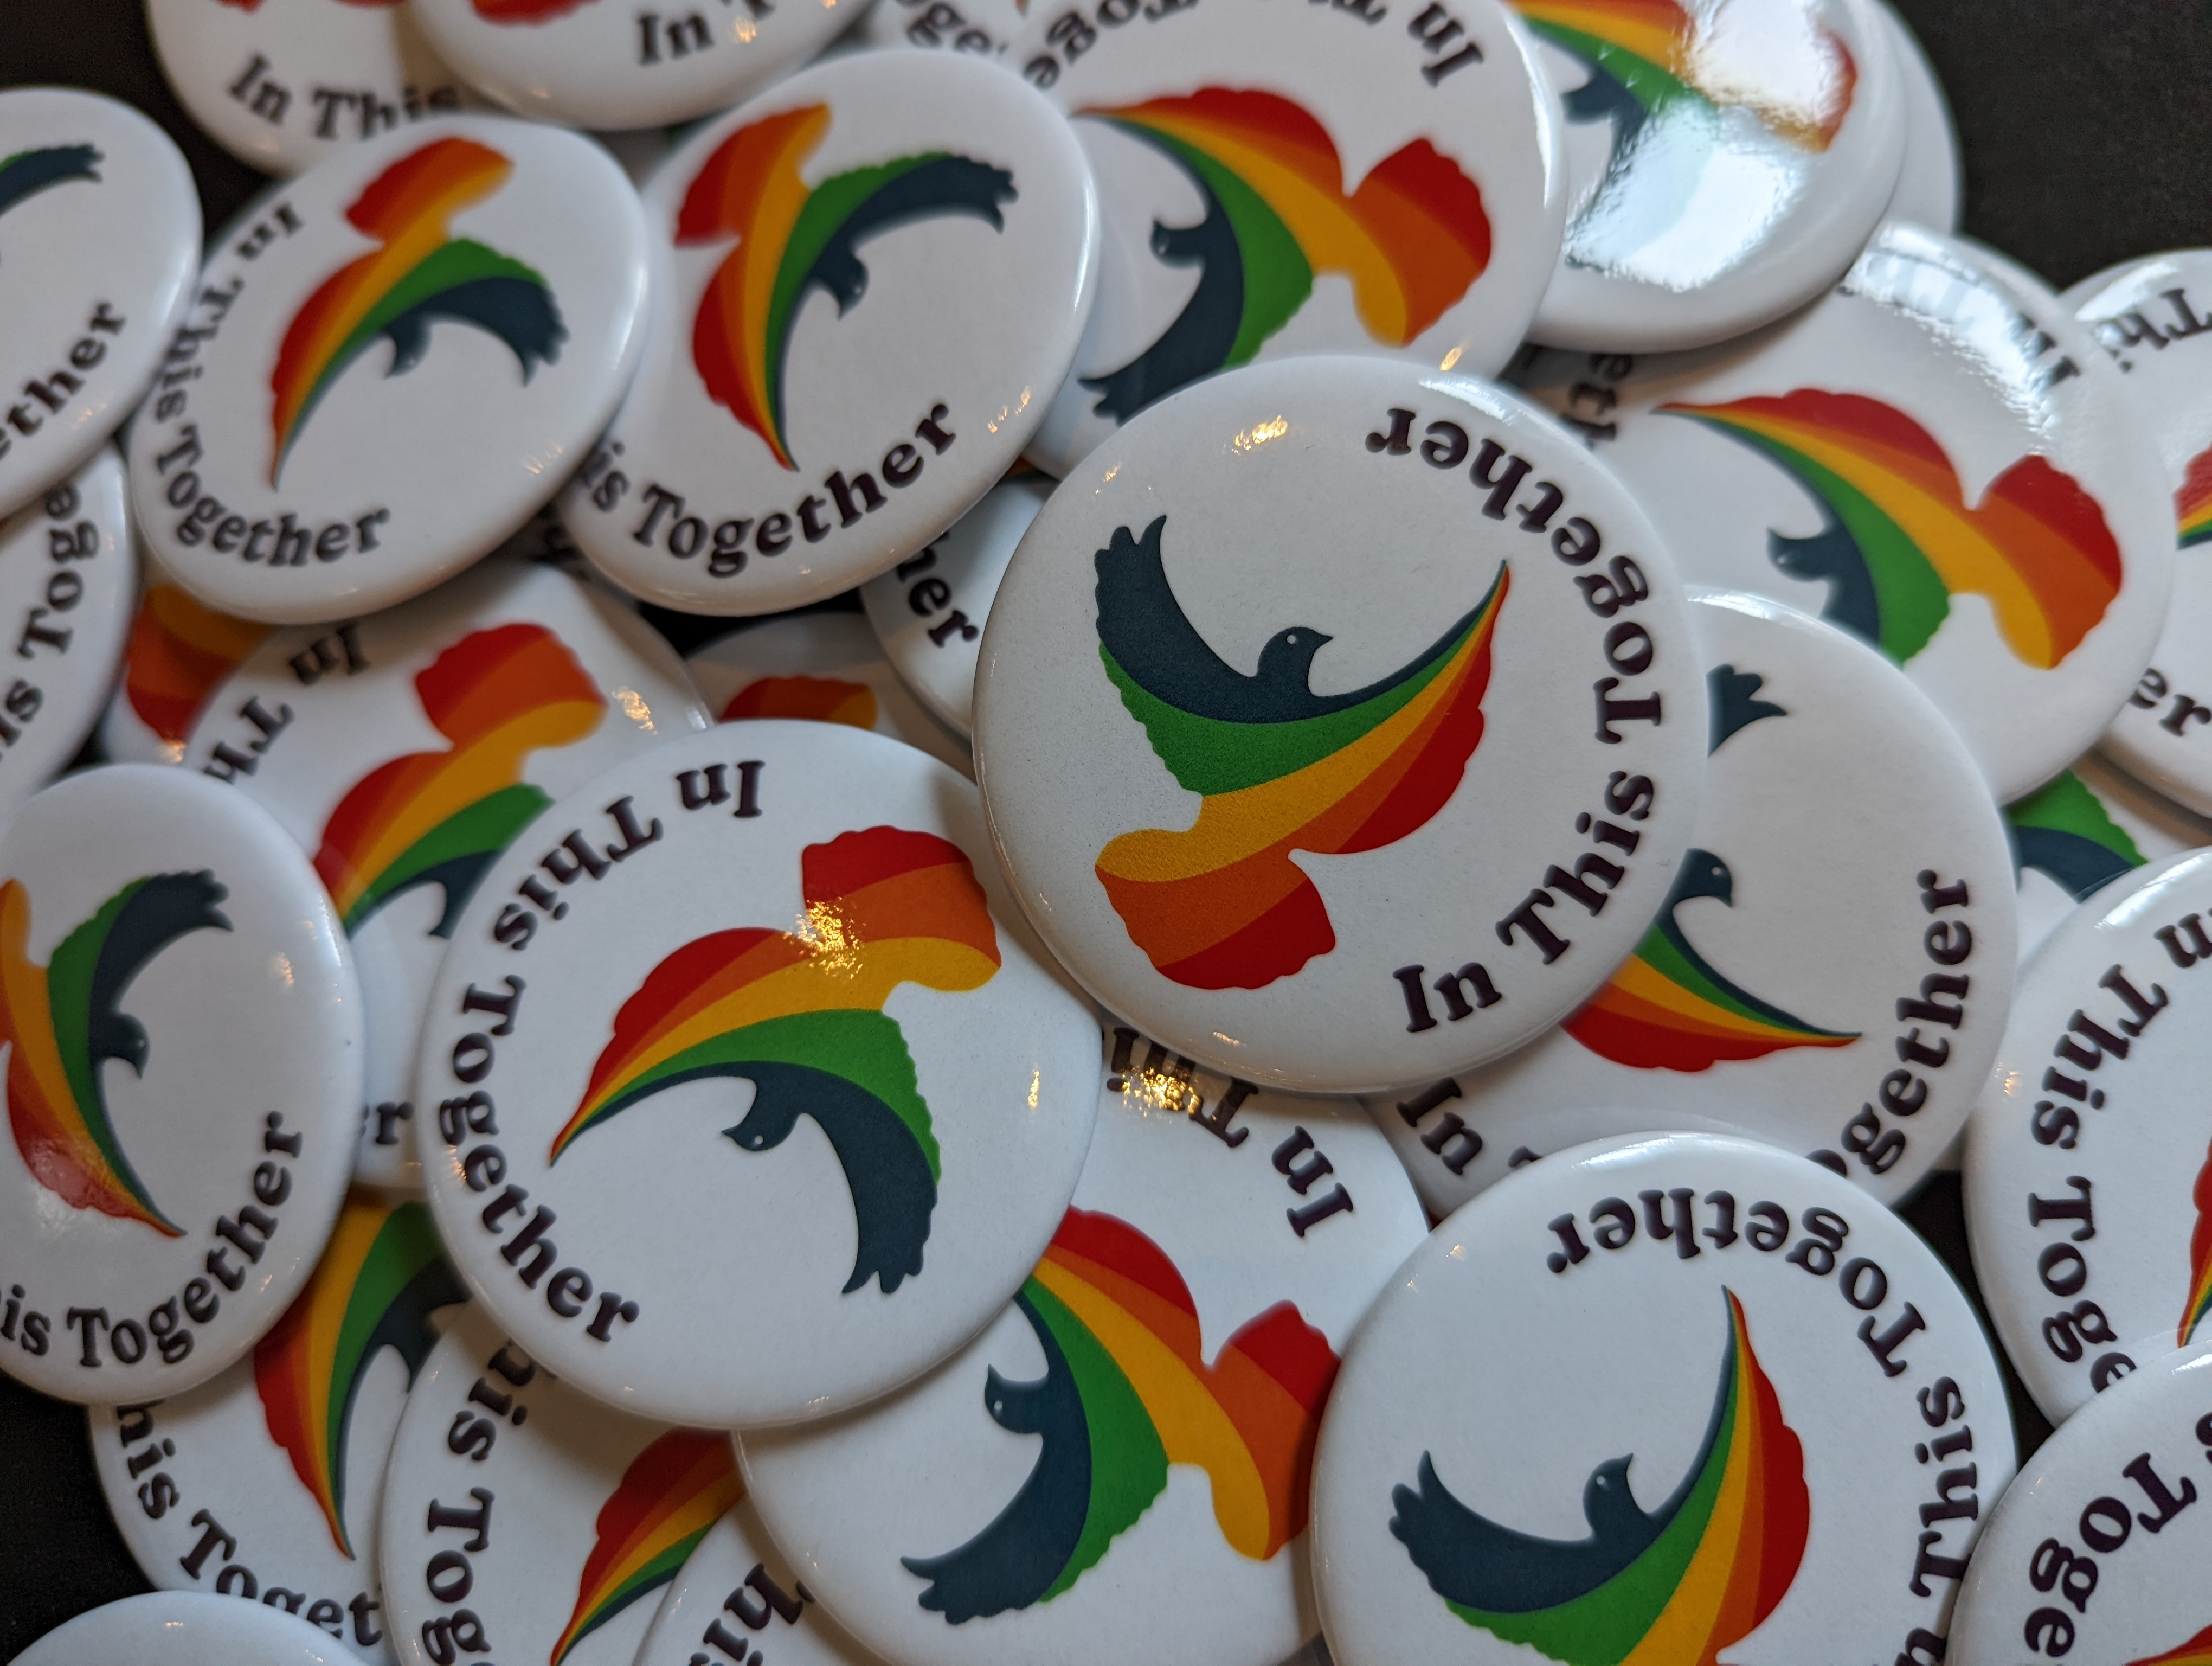 We wear our buttons with pride!